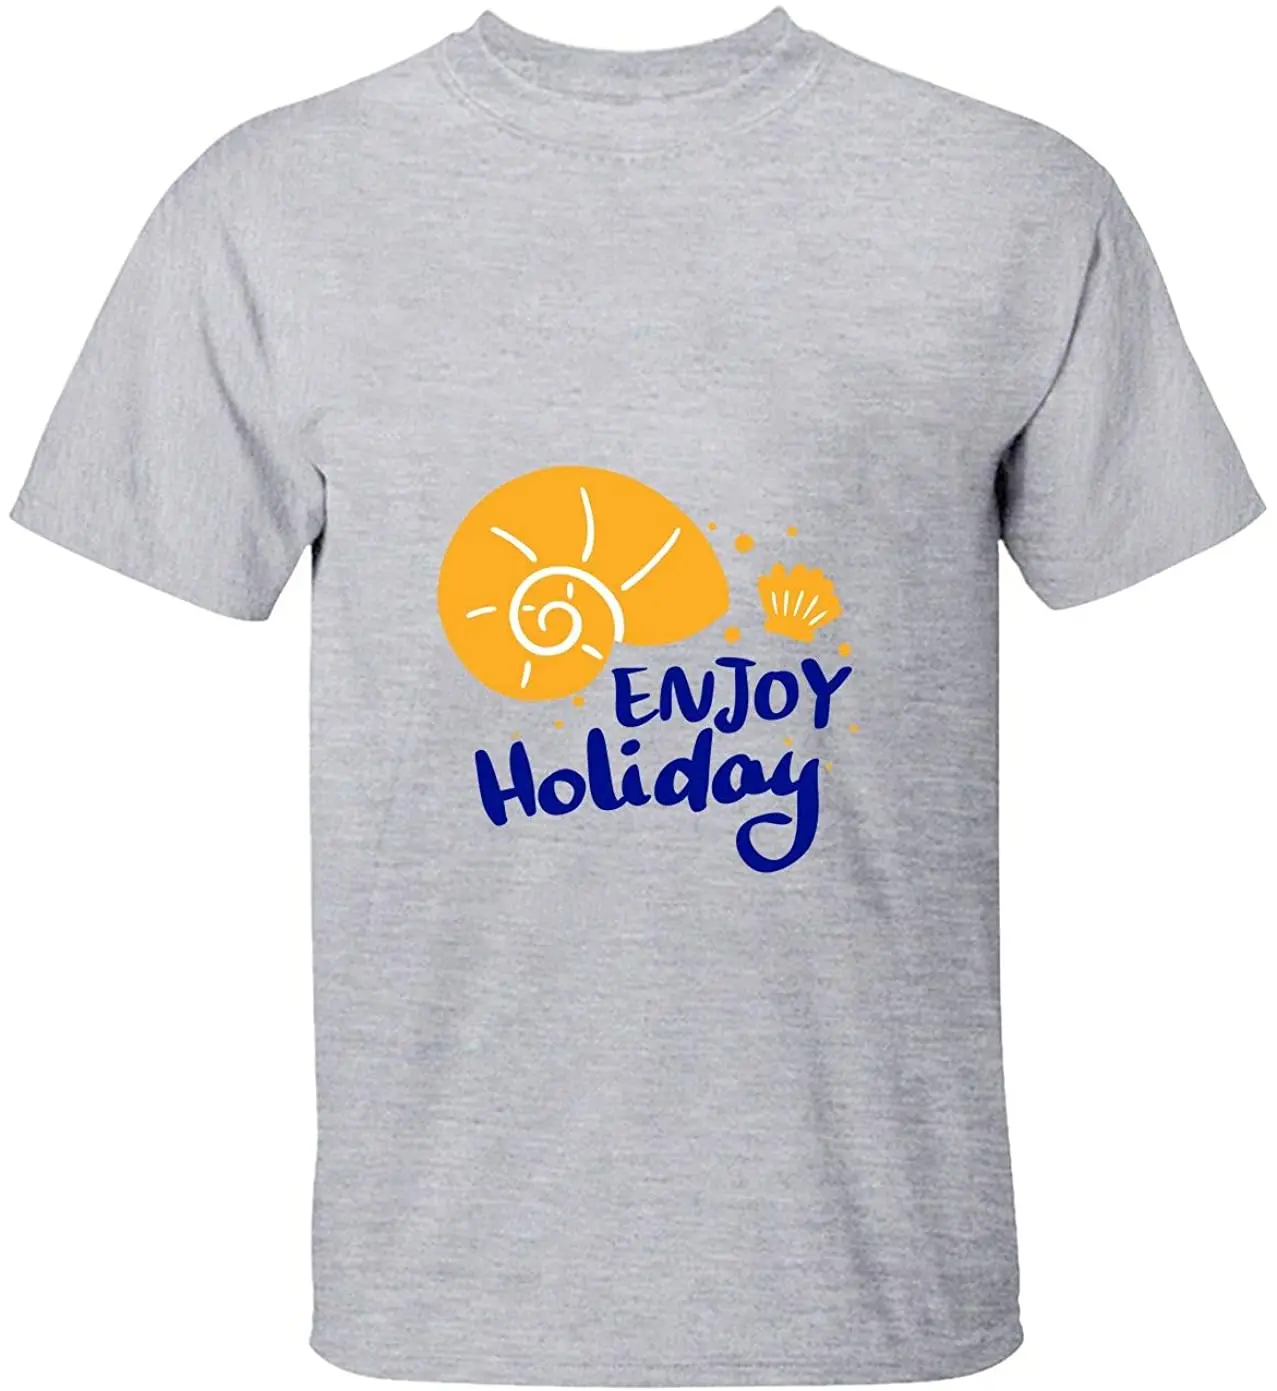 Friday Cool Design Graphic Funny Holiday Weekend  T-Shirt Tee 